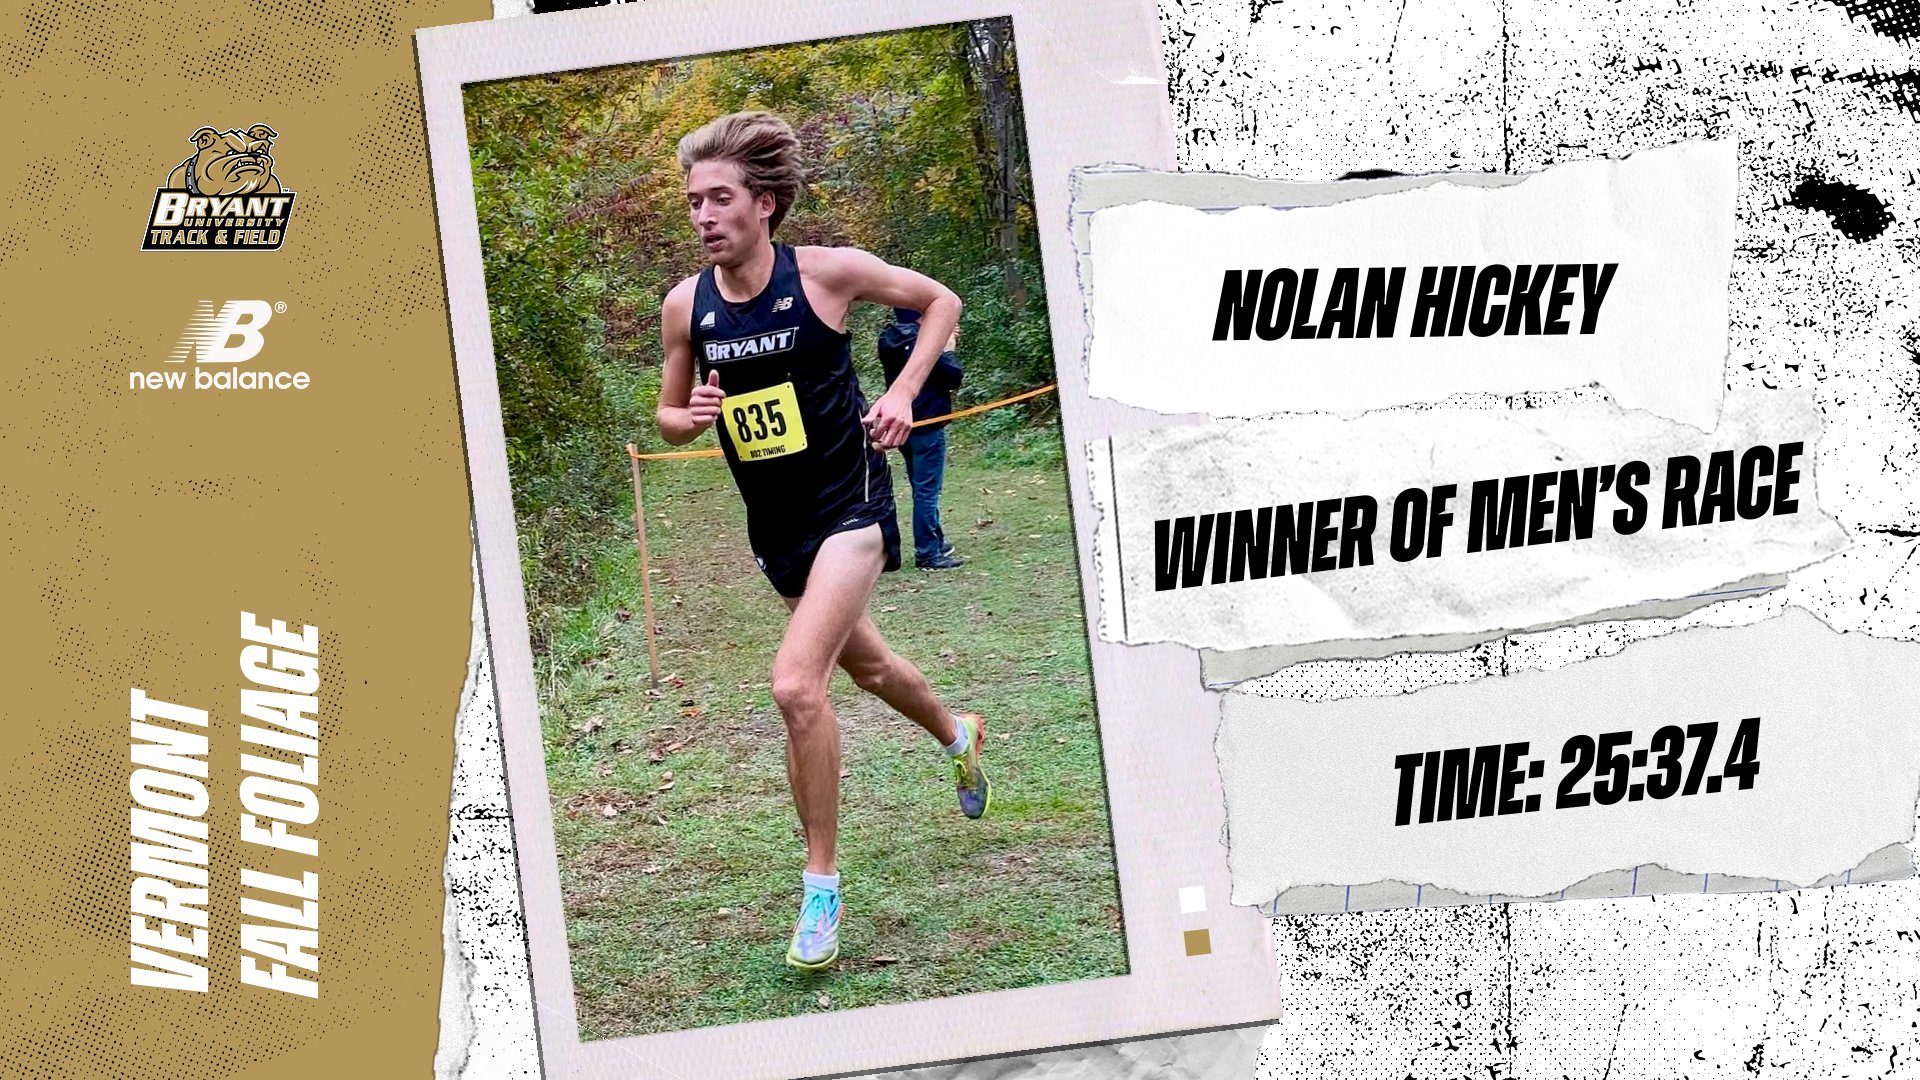 Nolan Hickey’s victory at Vermont Fall Foliage propels men to 2nd place finish; Women place 4th.